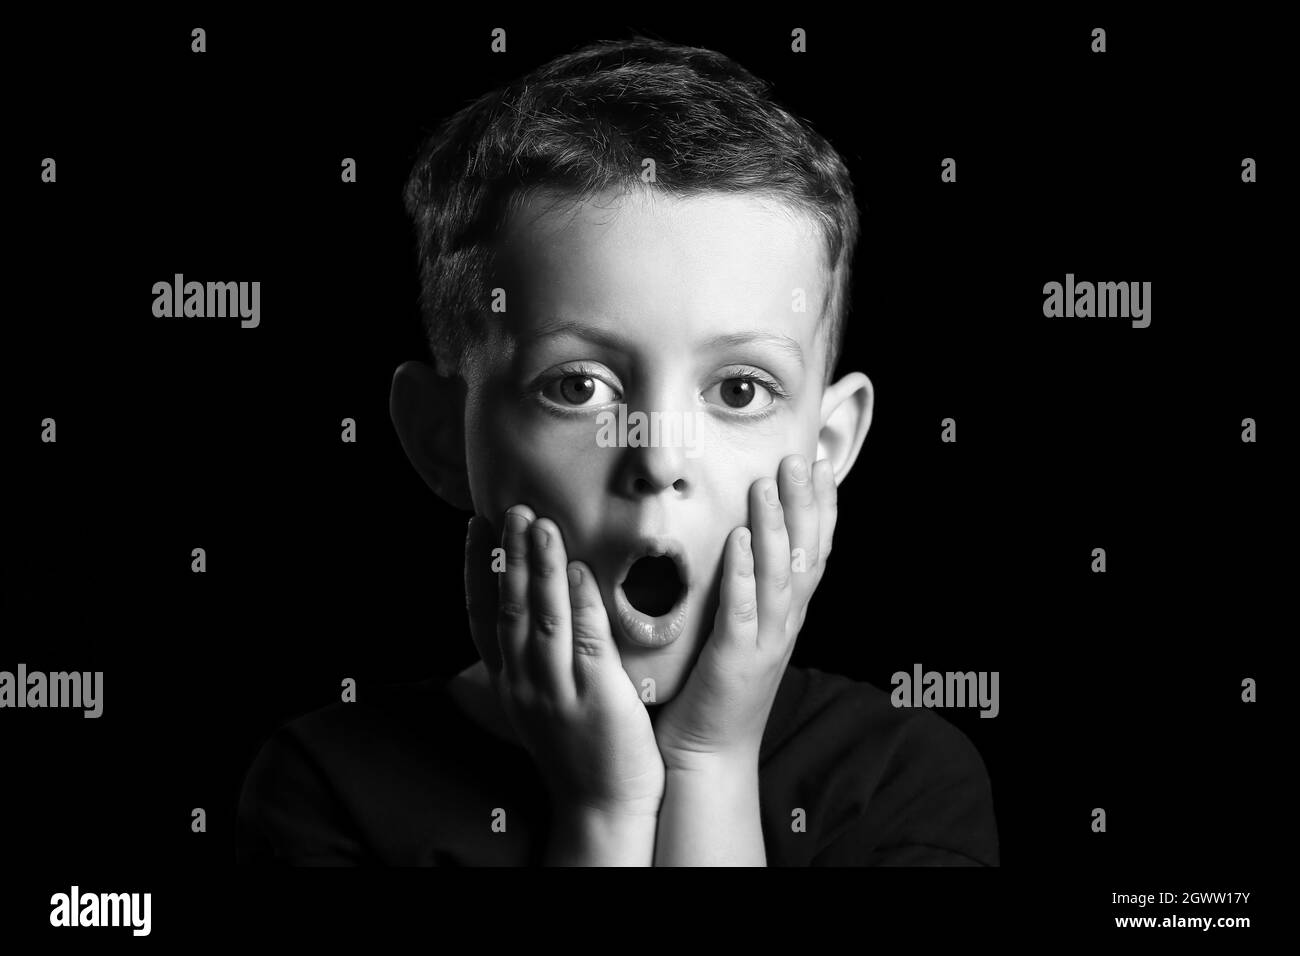 Black and white portrait of surprised little boy on dark background Stock Photo